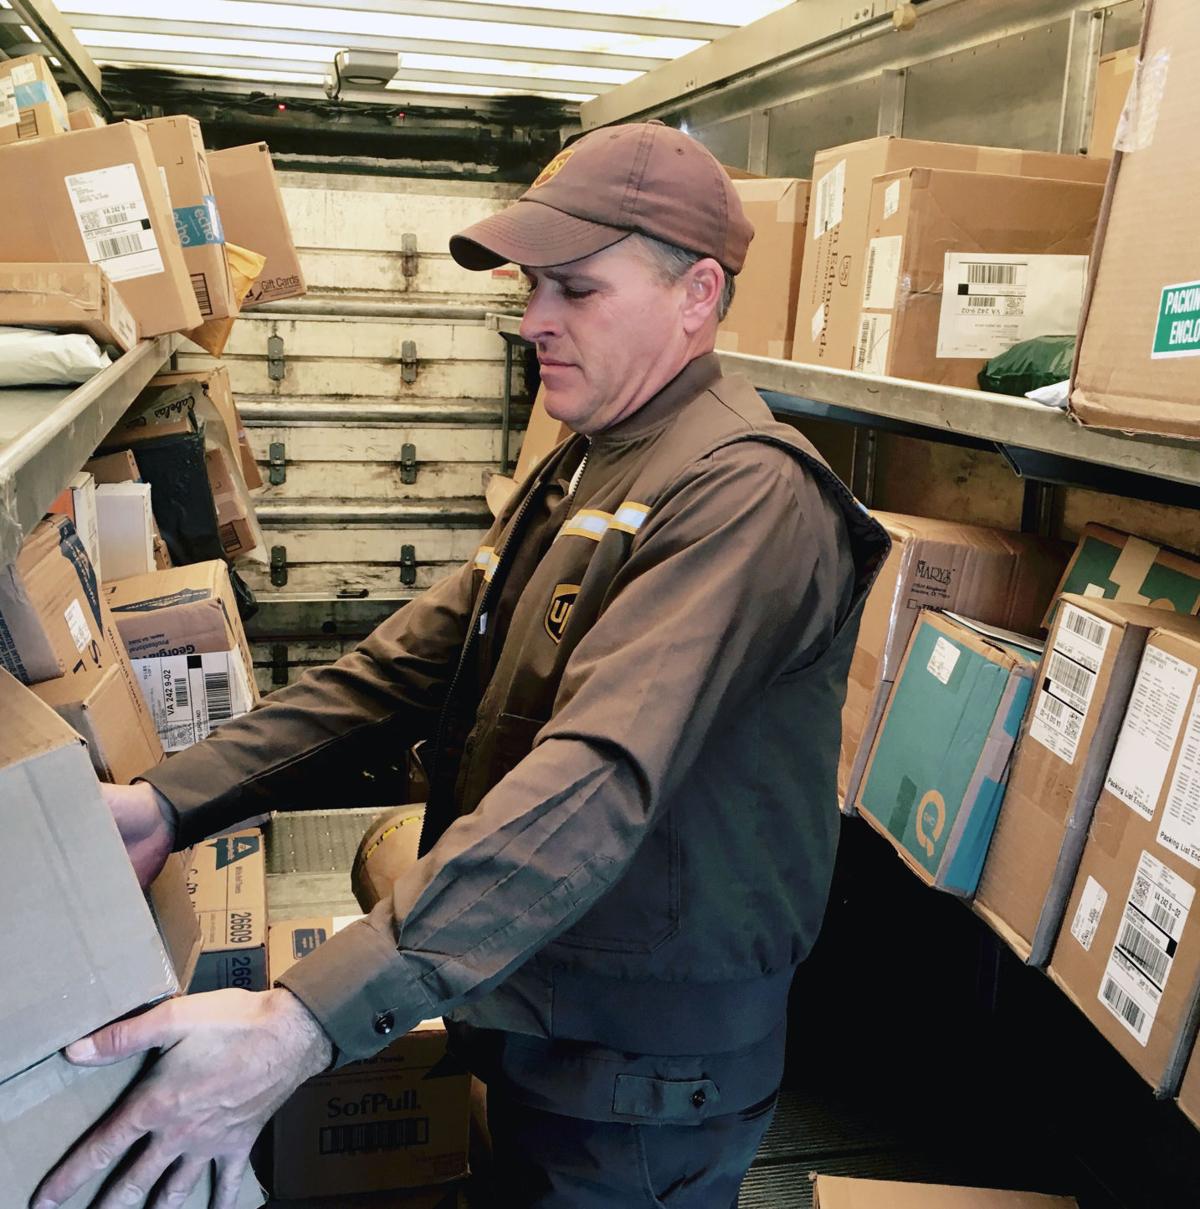 A day in the life of a UPS delivery driver during busiest